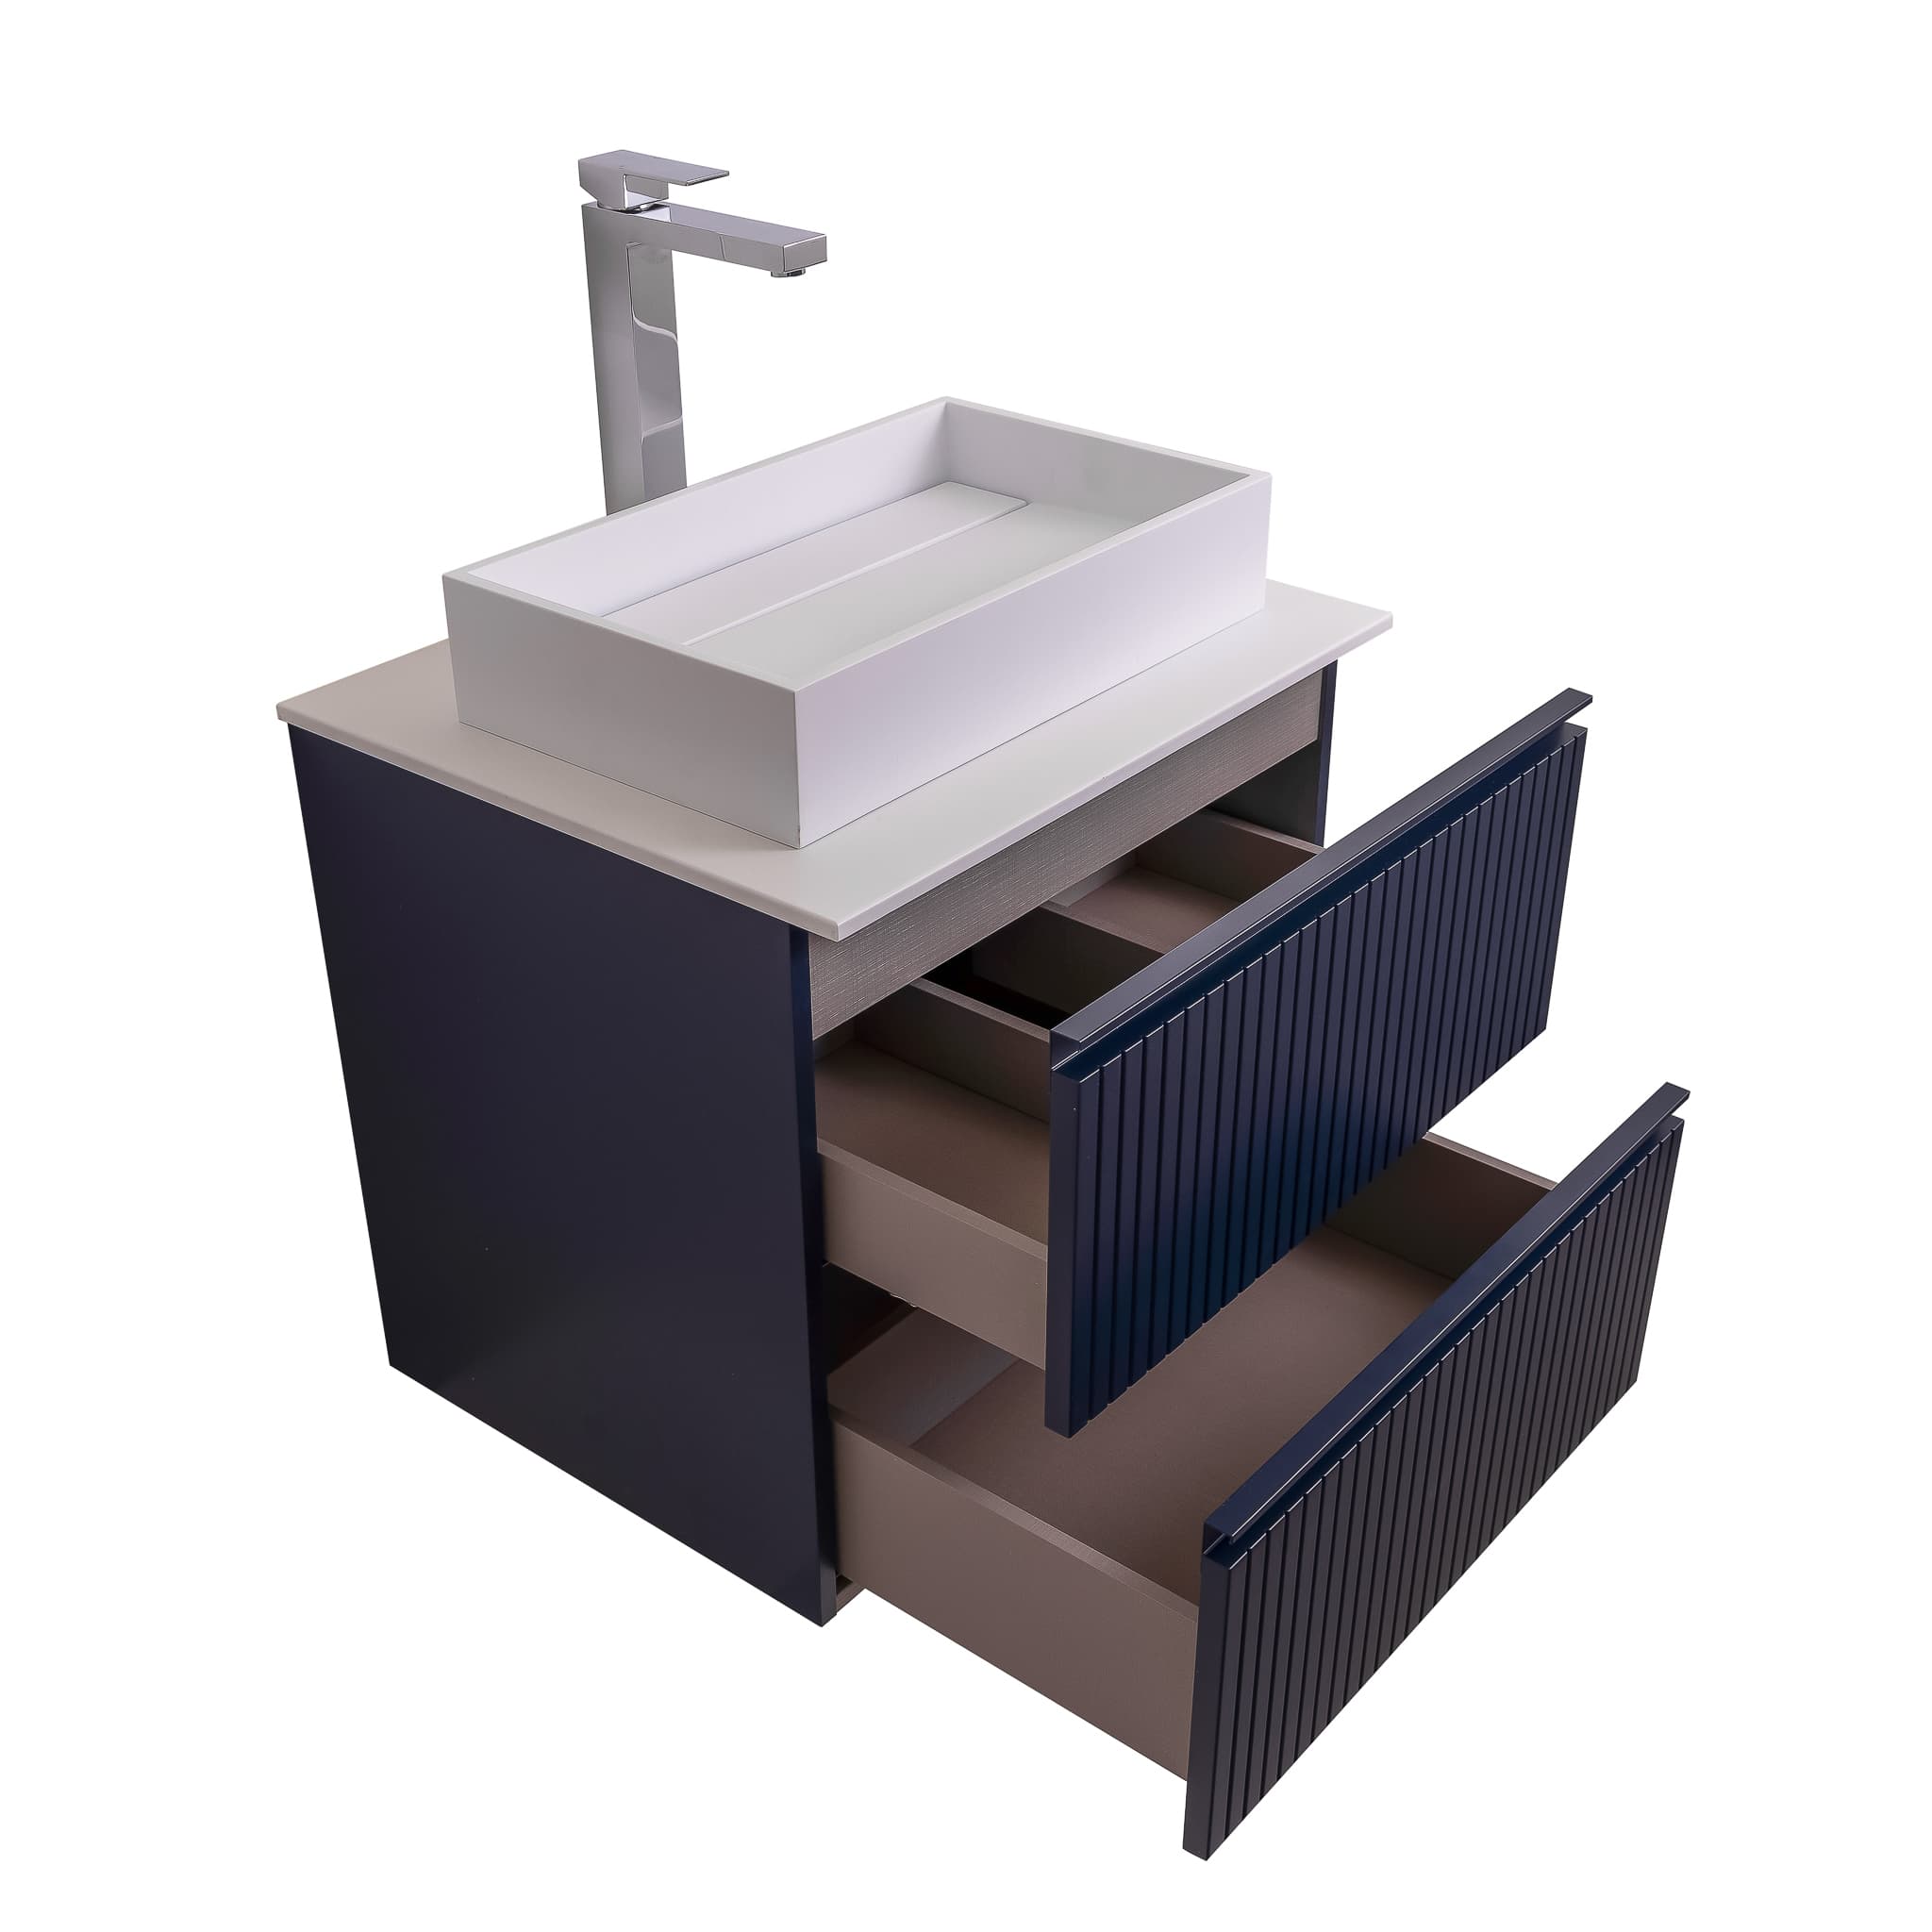 Ares 23.5 Matte Navy Blue Cabinet, Solid Surface Flat White Counter And Infinity Square Solid Surface White Basin 1329, Wall Mounted Modern Vanity Set